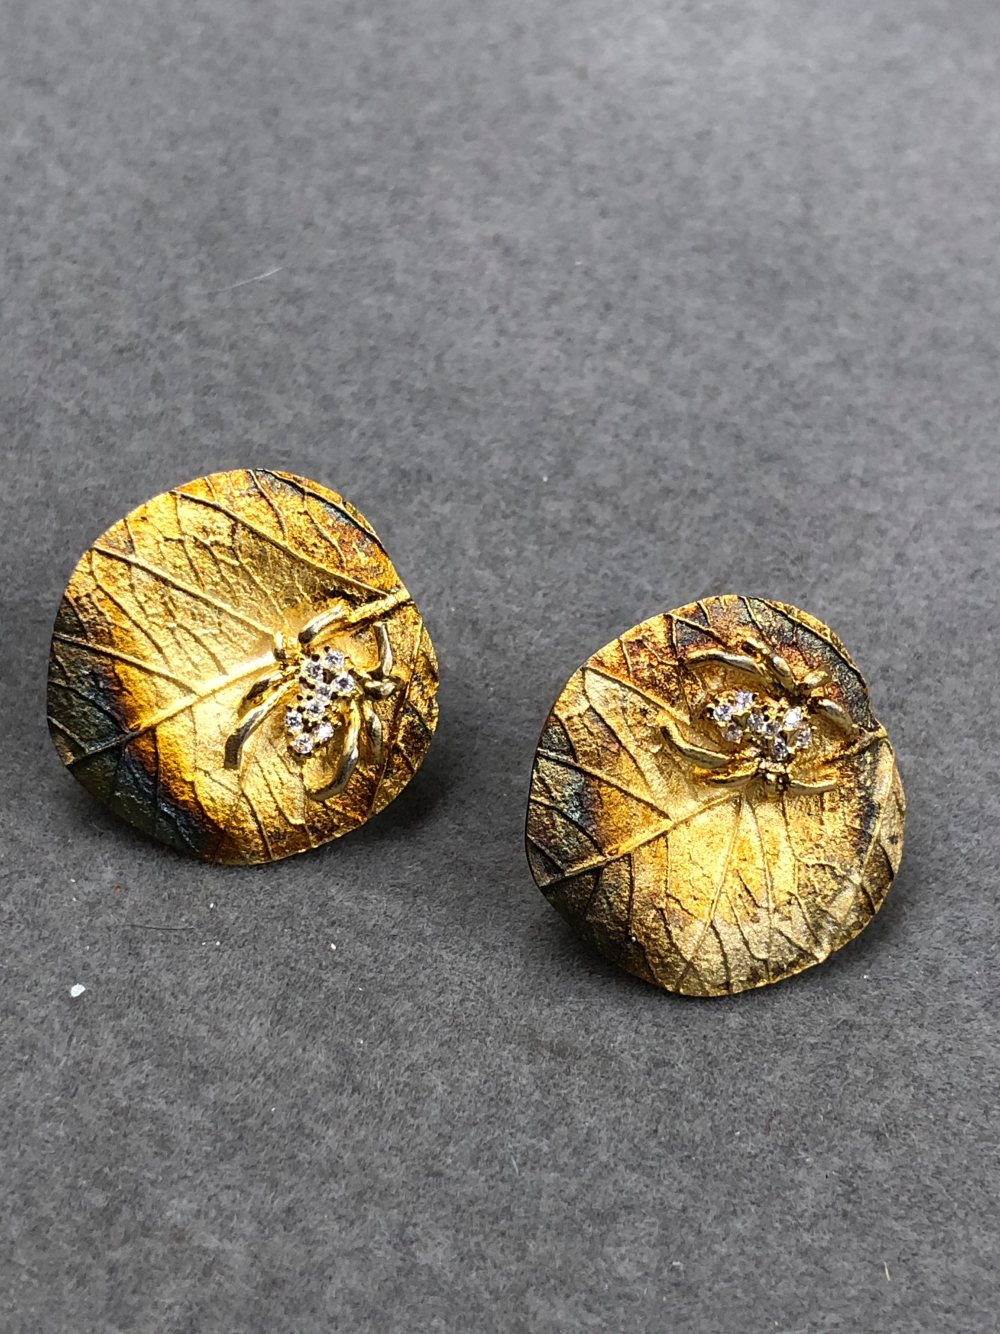 A PAIR OF FINE SILVER GILT STONE SET SPIDER CRAWLING ON BURNISHED LEAF STUD EARRINGS. DIAMETER 2cms, - Image 4 of 5